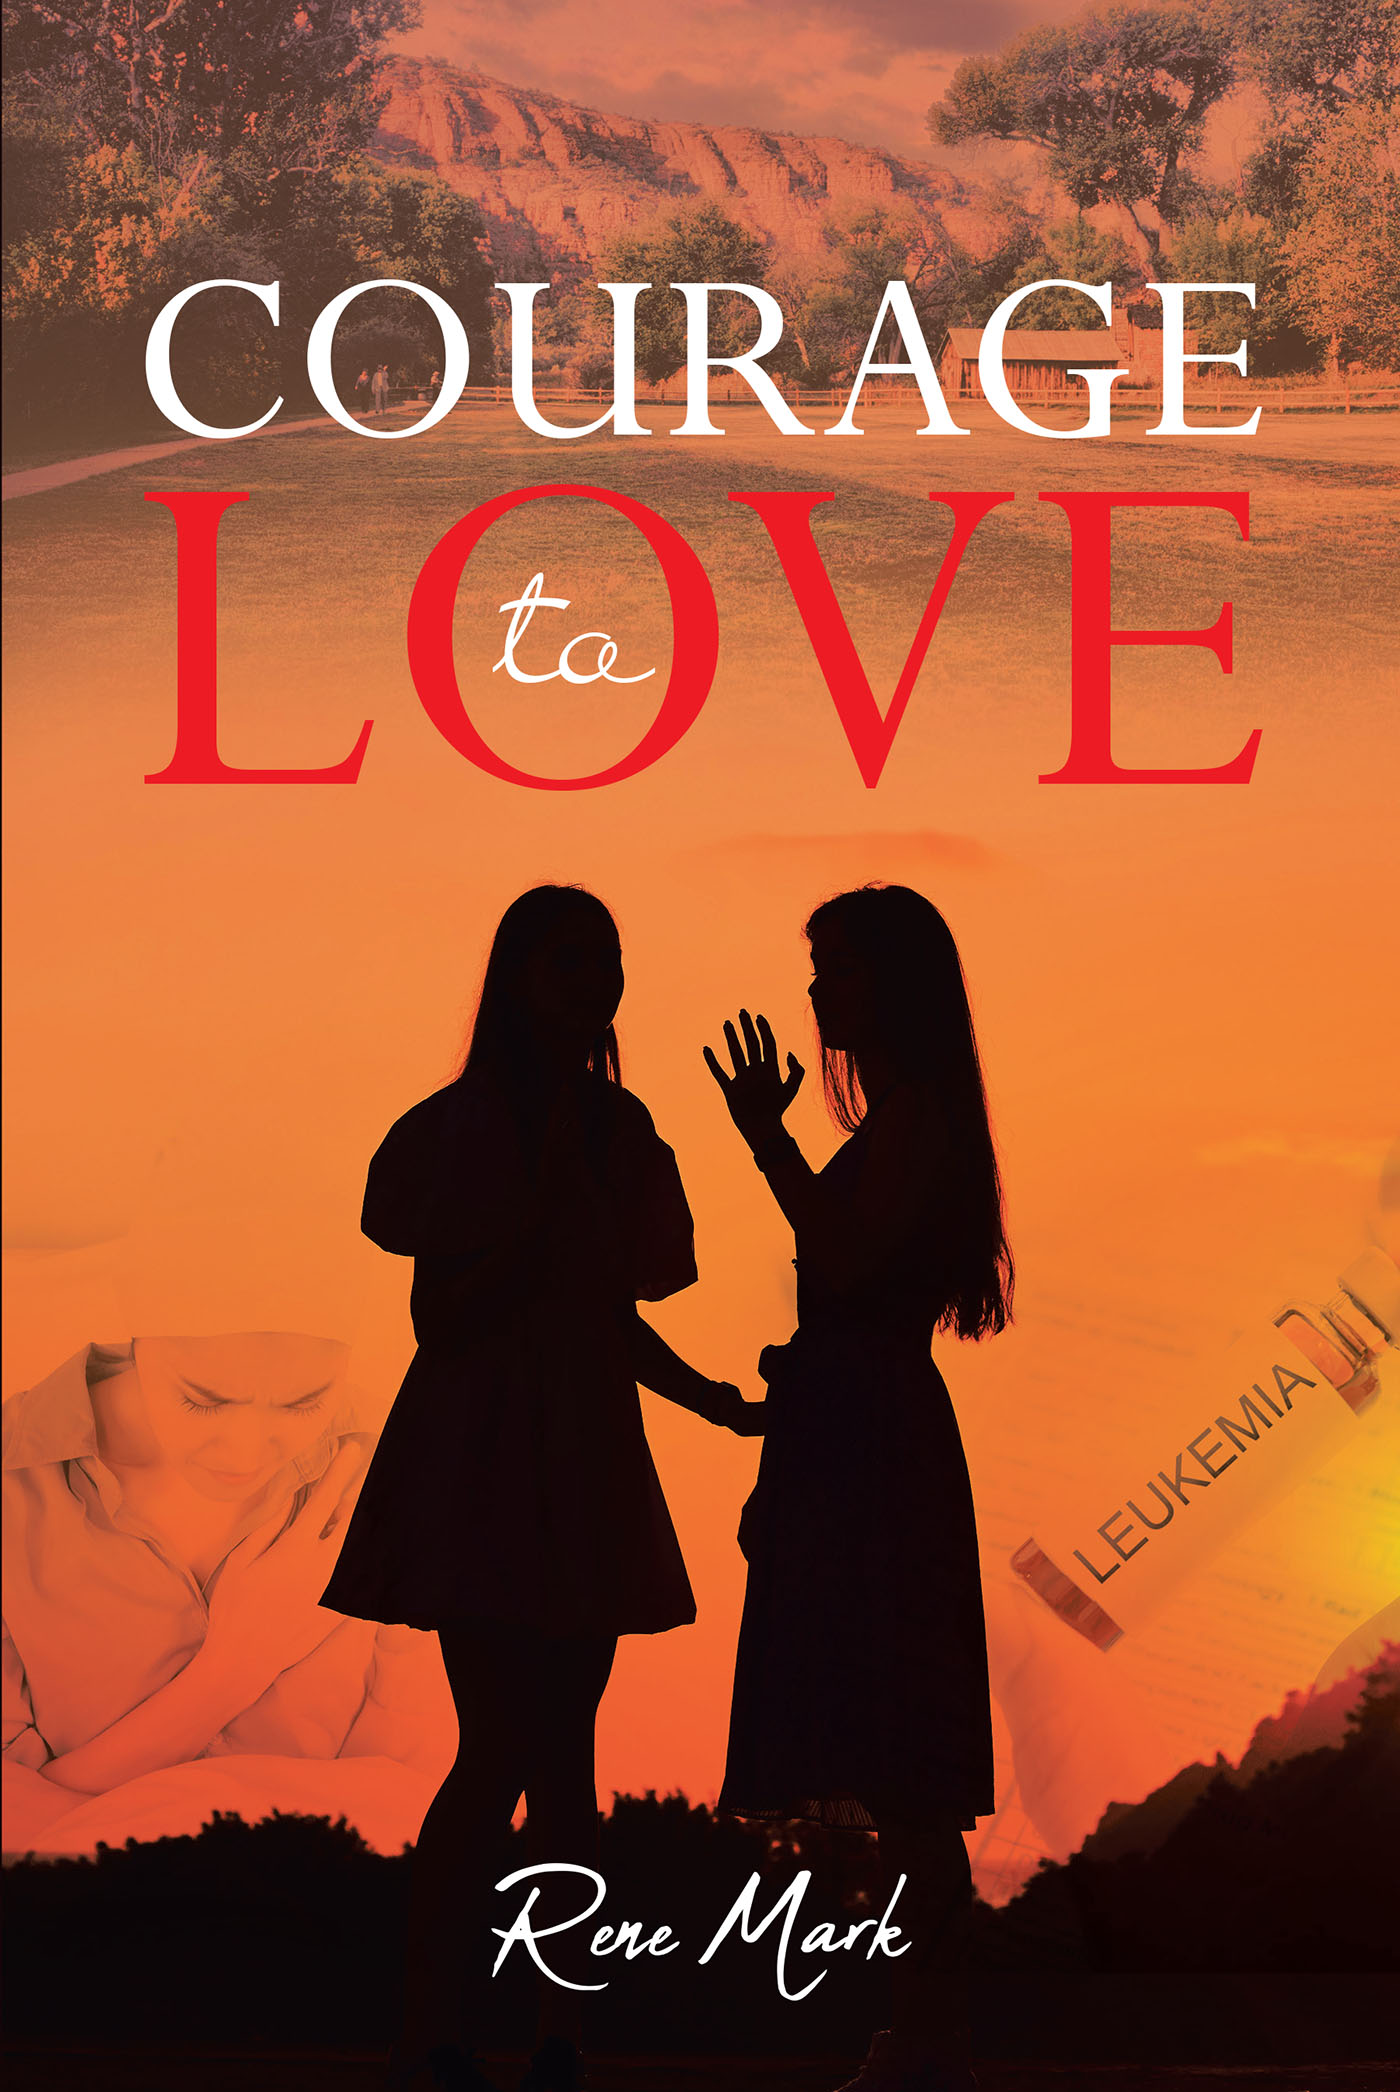 Author Rene Mark’s New Book, "Courage to Love," is a Stirring Tale of Two Sisters Bonded Together in Tragedy and Loss Who Share a Profound Familial Love for Each Other